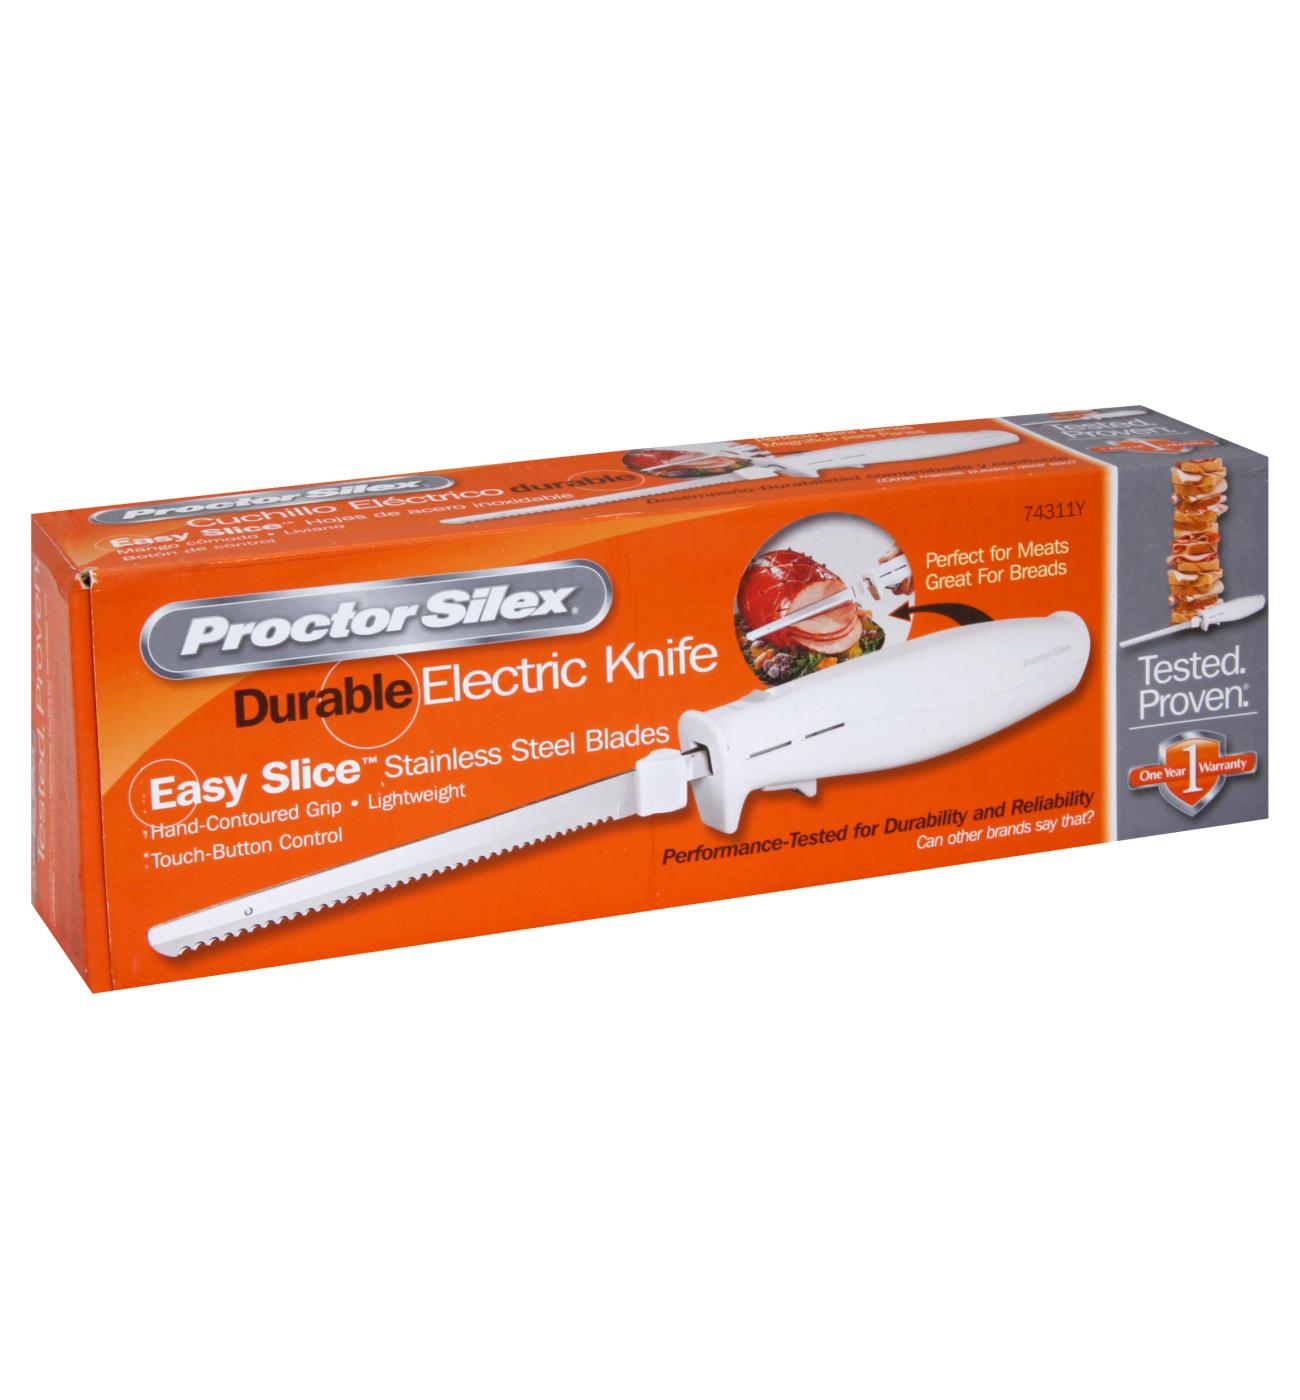 Electric Knives for sale in Pickett, Texas